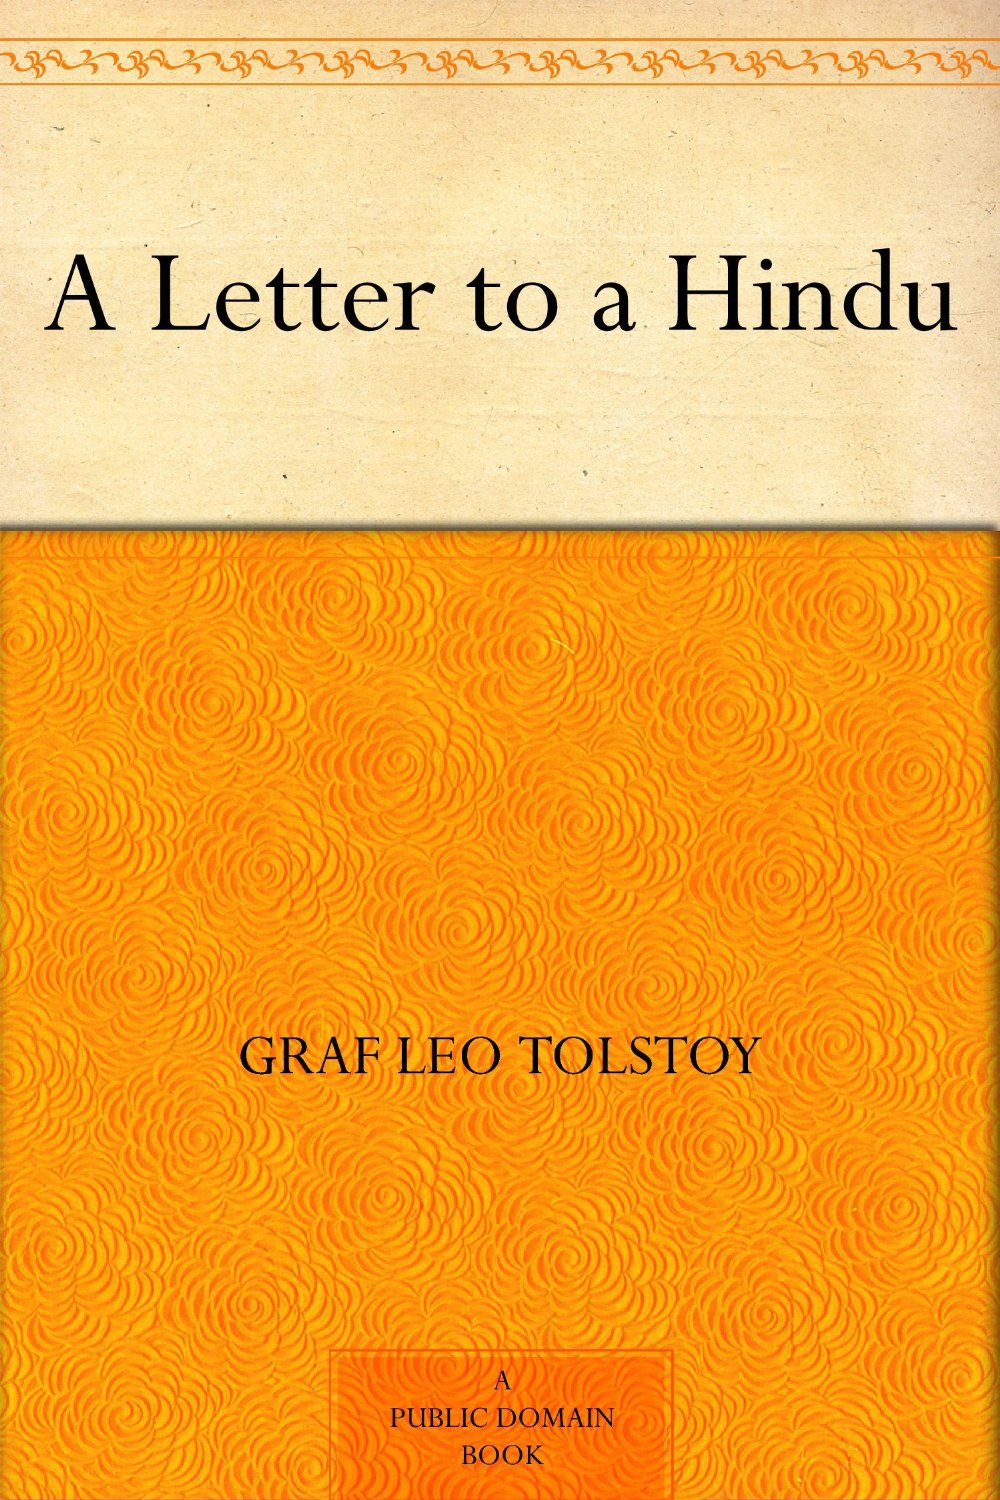 Why We Hurt Each Other: Tolstoy’s Letters to Gandhi on Love, Violence, and the Truth of the Human Spirit